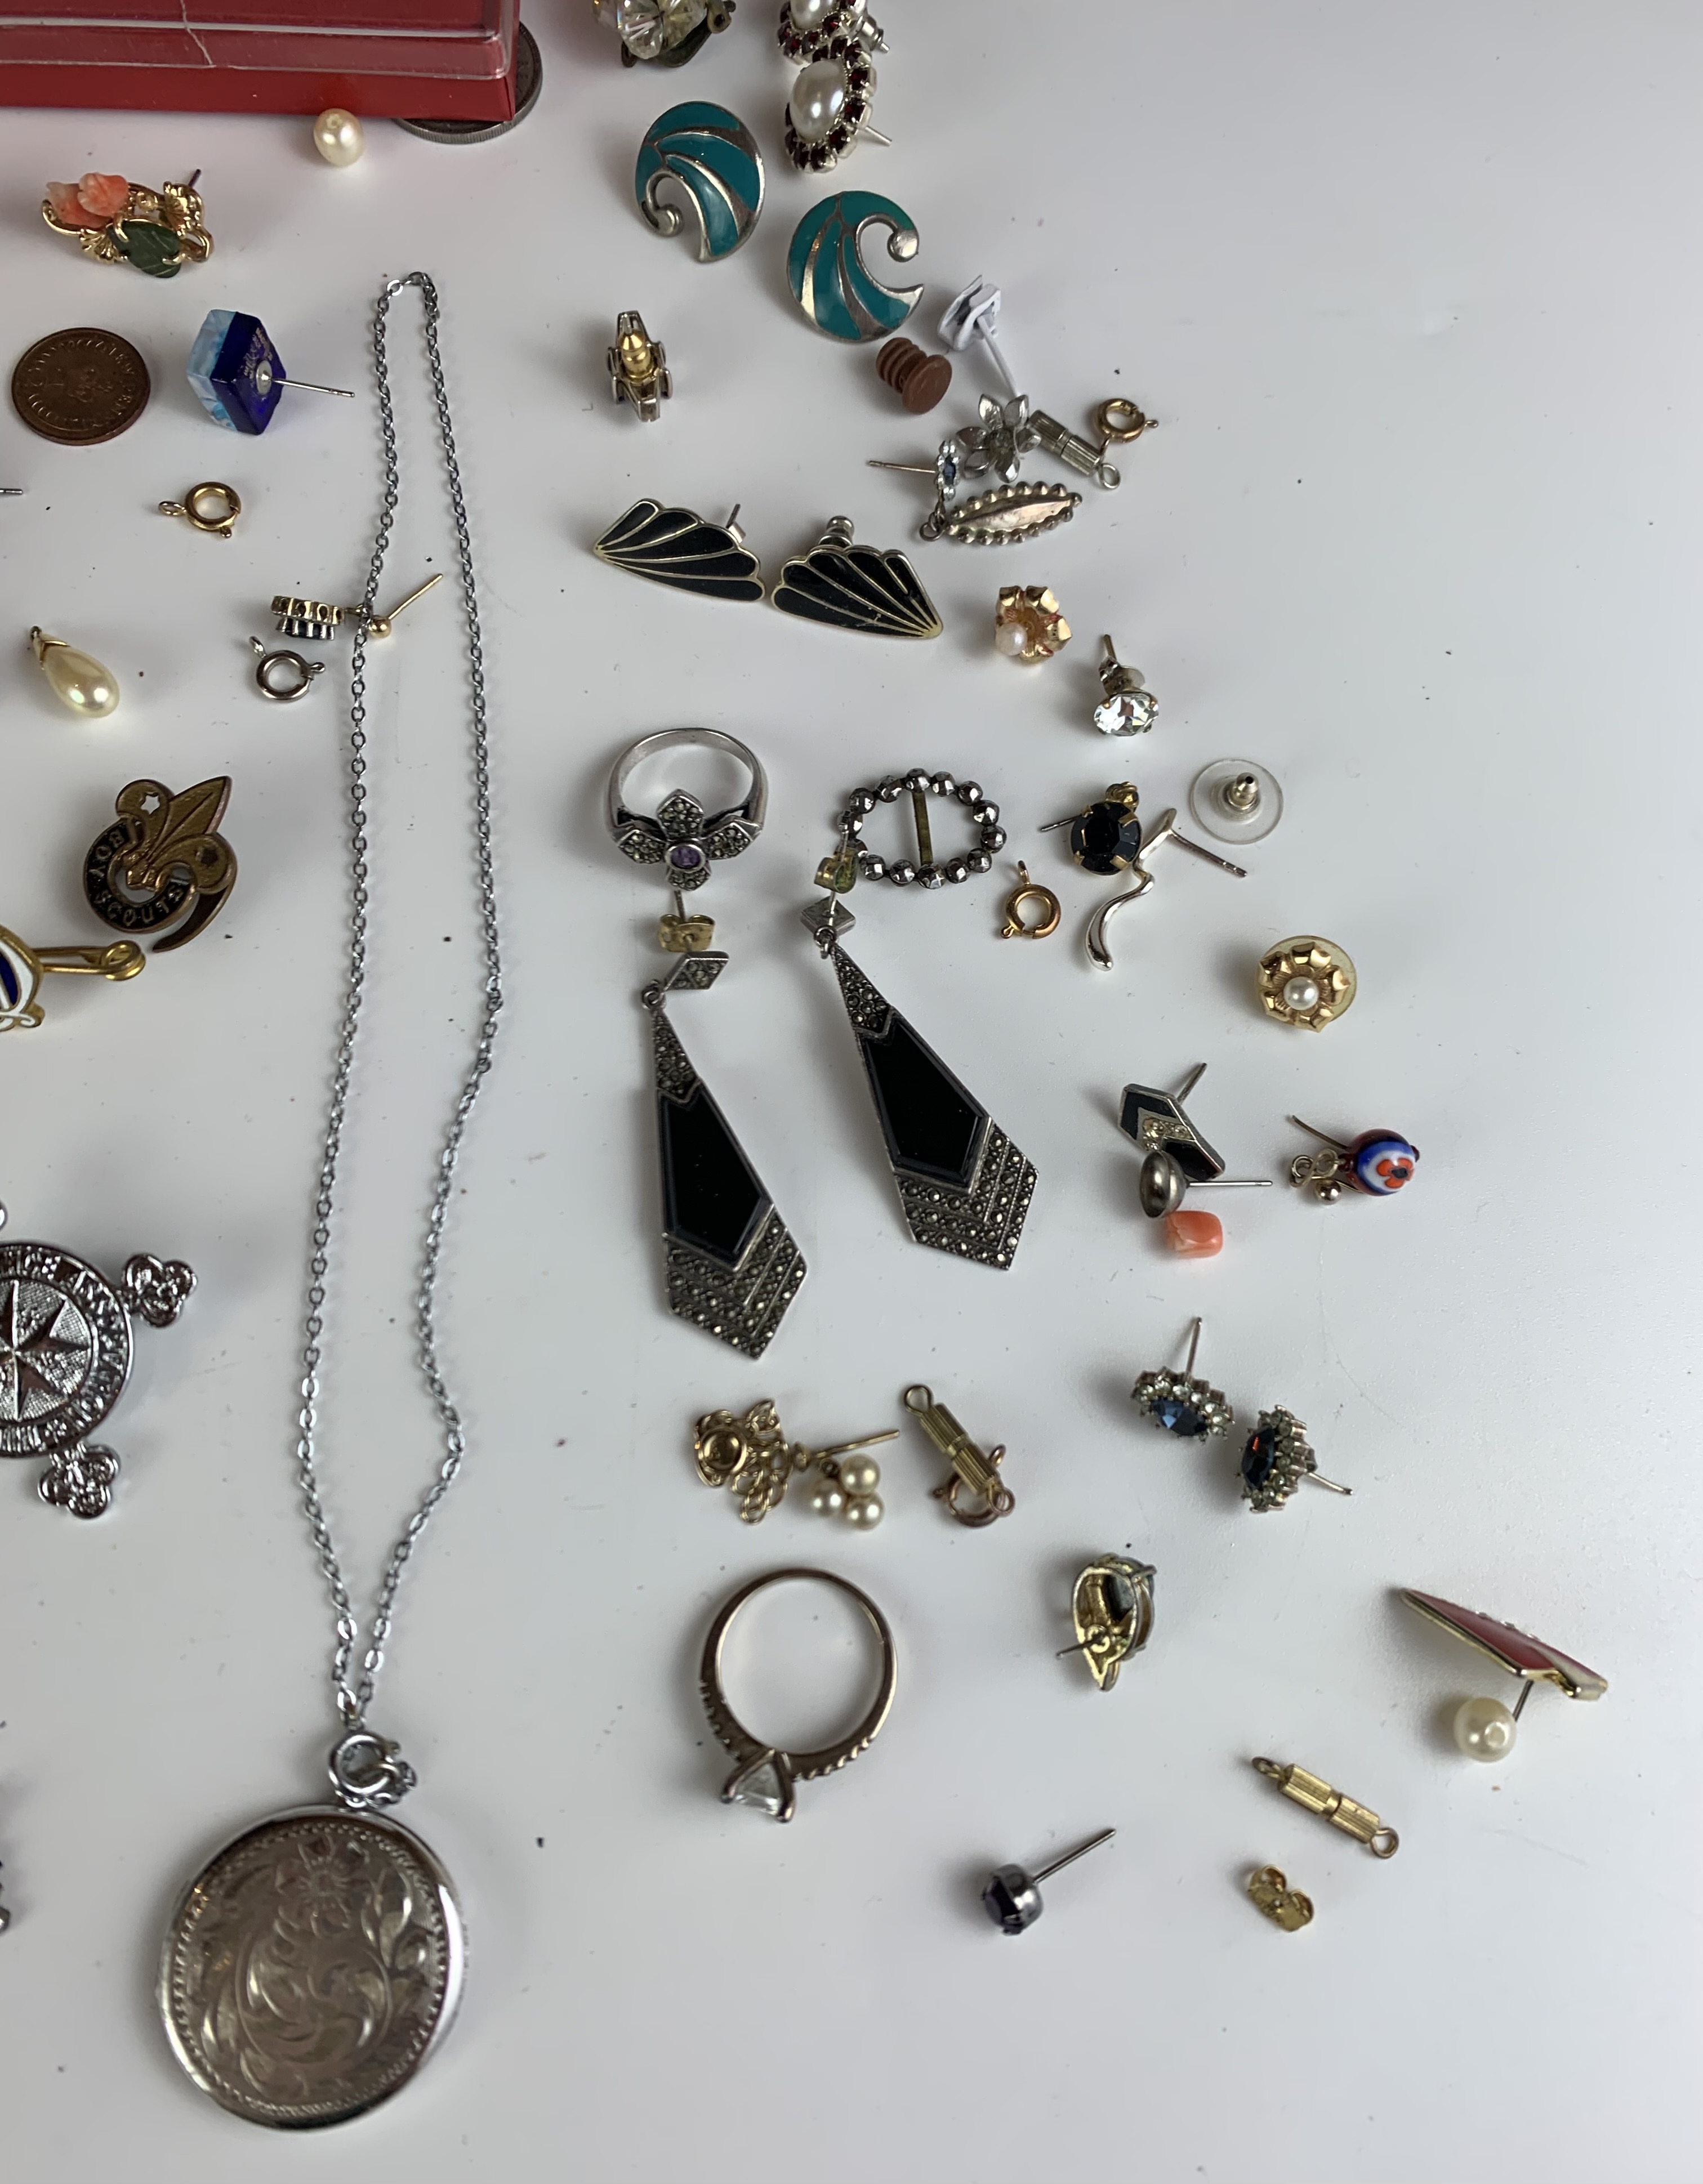 Dress jewellery including brooches, earrings, rings, souvenir spoon, odd coins and Azur watch - Image 6 of 9